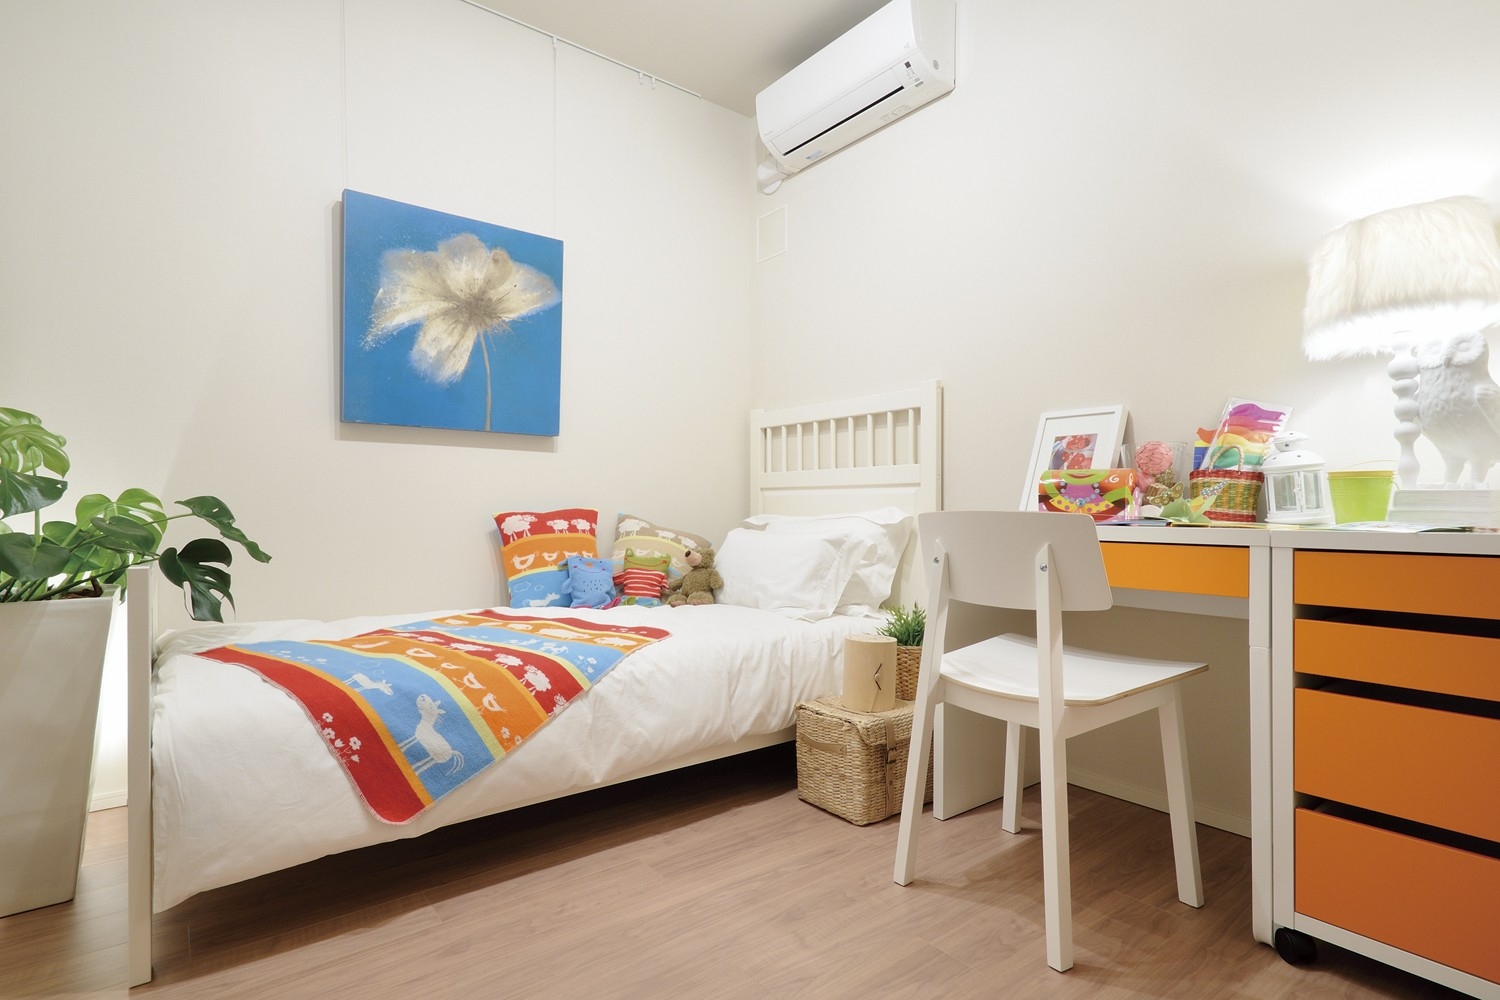 It arrives eye from the kitchen, Western-style rooms that are suitable for children's rooms (3)